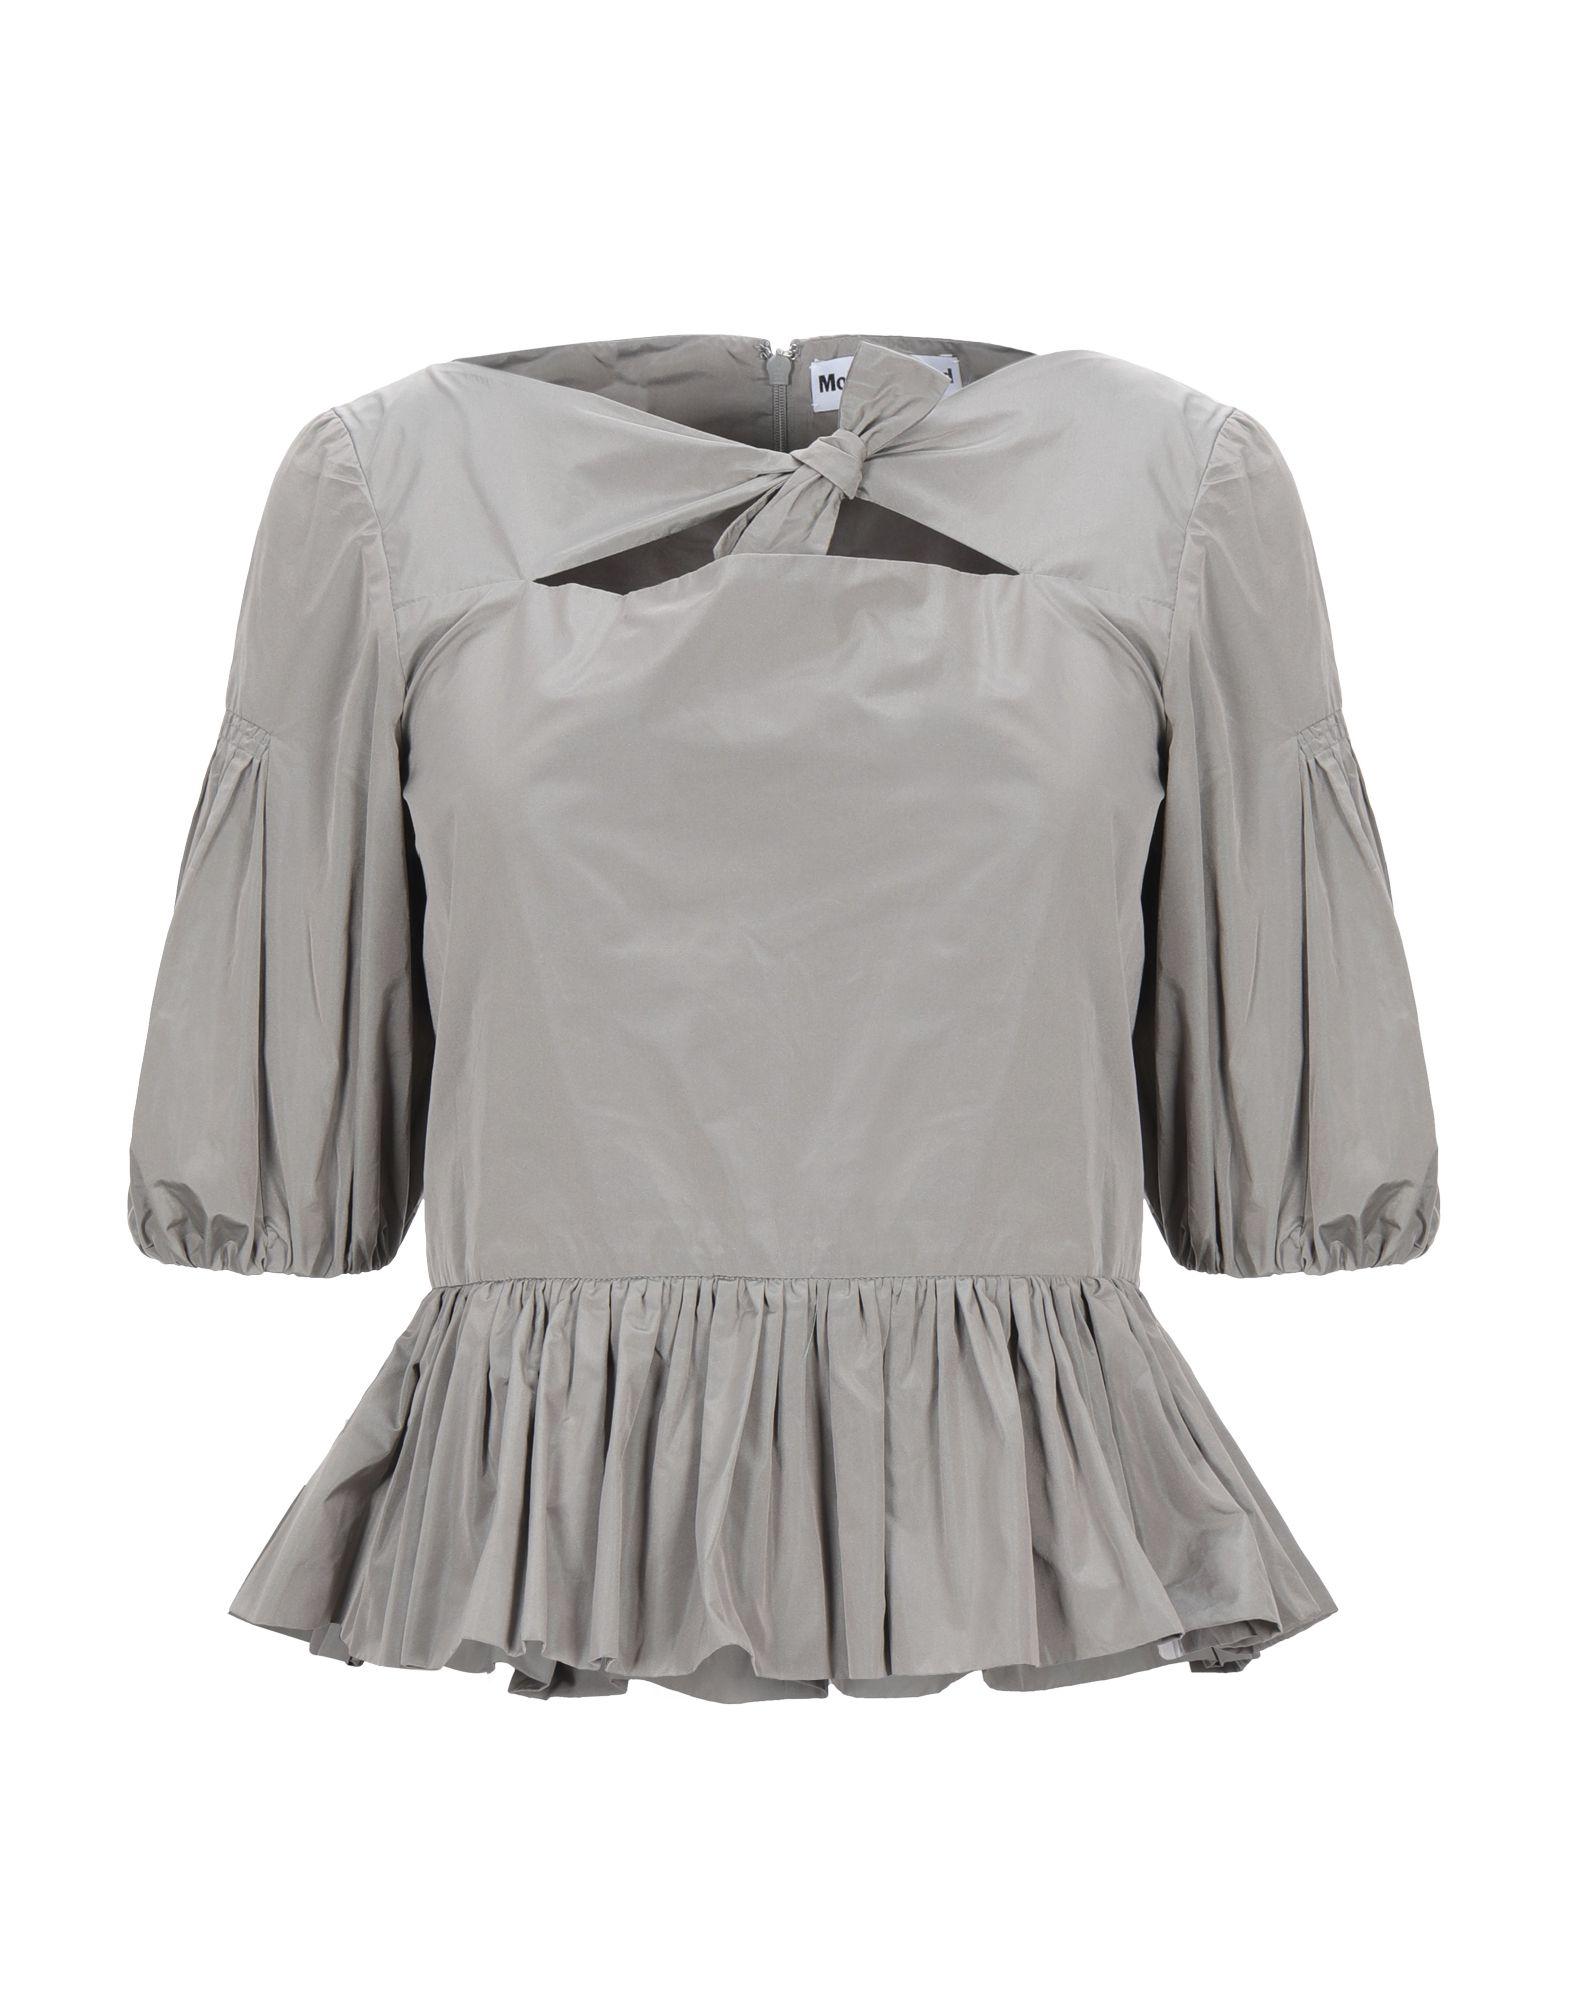 Molly Goddard Synthetic Blouse in Grey (Gray) - Lyst